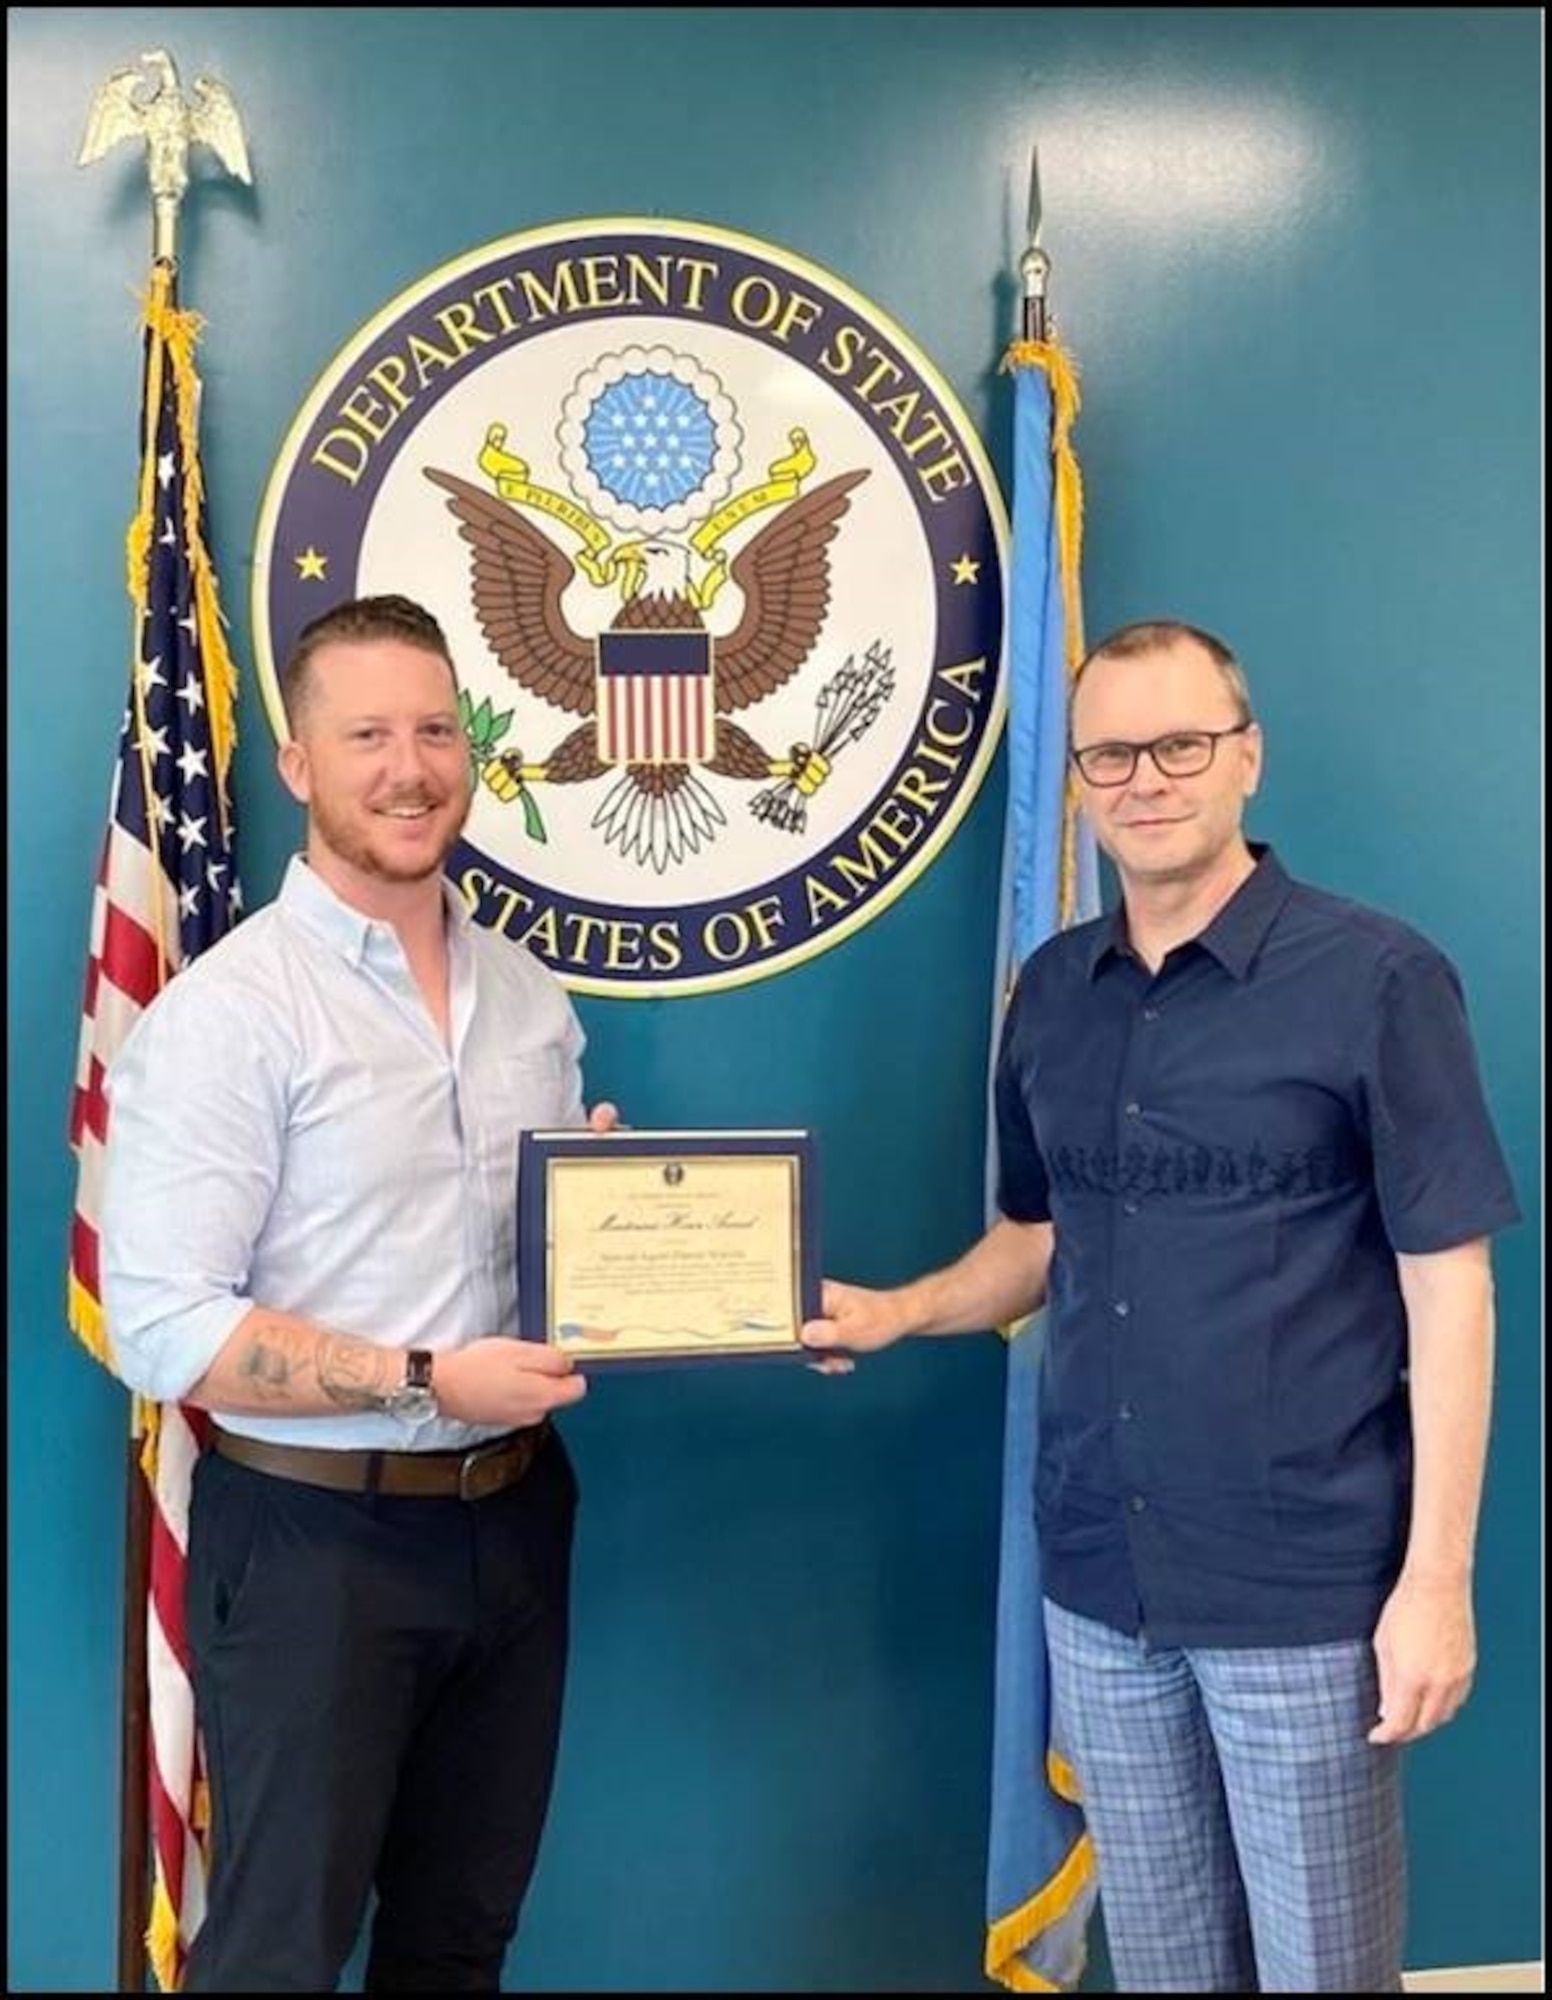 Andrew McLean, Charge' d'affaires, U.S. Embassy Koror, right, presents the U.S. State Department Meritorious Honor Award to Special Agent Daniel Scarola, OSI 6 FIR, SMB OL-A, Guam, Aug. 17, 2022. John Hennessy-Niland, U.S. Ambassador approved and signed the award before departing Palau to retire. (Photo by SA Nicole Orzech, OSI 6 FIR SMB OL-A, Guam.)